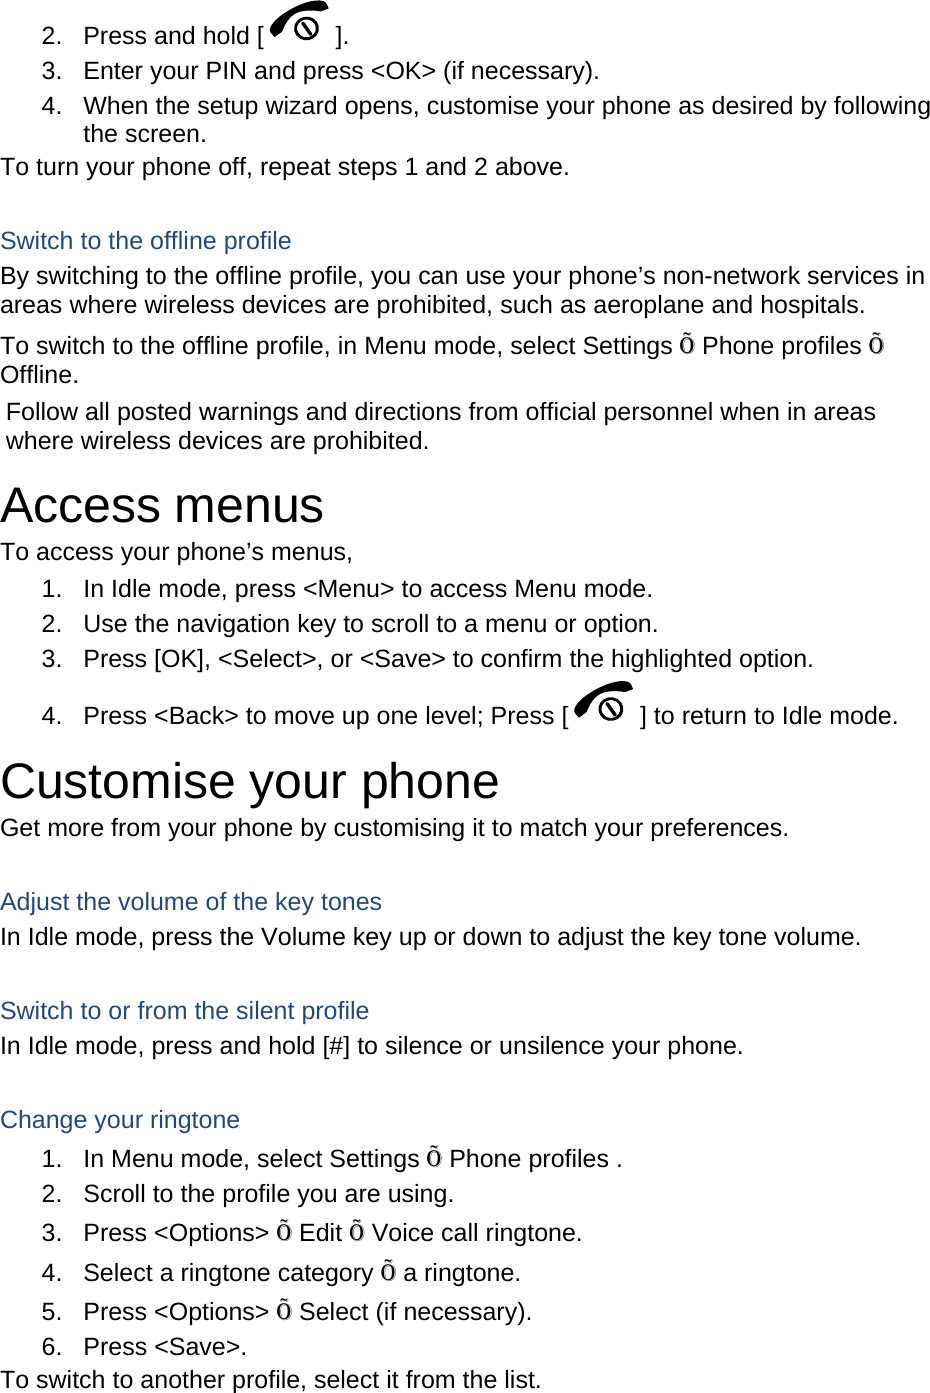 2.  Press and hold [ ]. 3.  Enter your PIN and press &lt;OK&gt; (if necessary). 4.  When the setup wizard opens, customise your phone as desired by following the screen. To turn your phone off, repeat steps 1 and 2 above.  Switch to the offline profile By switching to the offline profile, you can use your phone’s non-network services in areas where wireless devices are prohibited, such as aeroplane and hospitals. To switch to the offline profile, in Menu mode, select Settings Õ Phone profiles Õ Offline. Follow all posted warnings and directions from official personnel when in areas where wireless devices are prohibited. Access menus To access your phone’s menus, 1.  In Idle mode, press &lt;Menu&gt; to access Menu mode. 2.  Use the navigation key to scroll to a menu or option. 3.  Press [OK], &lt;Select&gt;, or &lt;Save&gt; to confirm the highlighted option. 4.  Press &lt;Back&gt; to move up one level; Press [ ] to return to Idle mode. Customise your phone Get more from your phone by customising it to match your preferences.  Adjust the volume of the key tones In Idle mode, press the Volume key up or down to adjust the key tone volume.  Switch to or from the silent profile In Idle mode, press and hold [#] to silence or unsilence your phone.  Change your ringtone 1.  In Menu mode, select Settings Õ Phone profiles . 2.  Scroll to the profile you are using. 3. Press &lt;Options&gt; Õ Edit Õ Voice call ringtone. 4.  Select a ringtone category Õ a ringtone. 5. Press &lt;Options&gt; Õ Select (if necessary). 6. Press &lt;Save&gt;. To switch to another profile, select it from the list. 